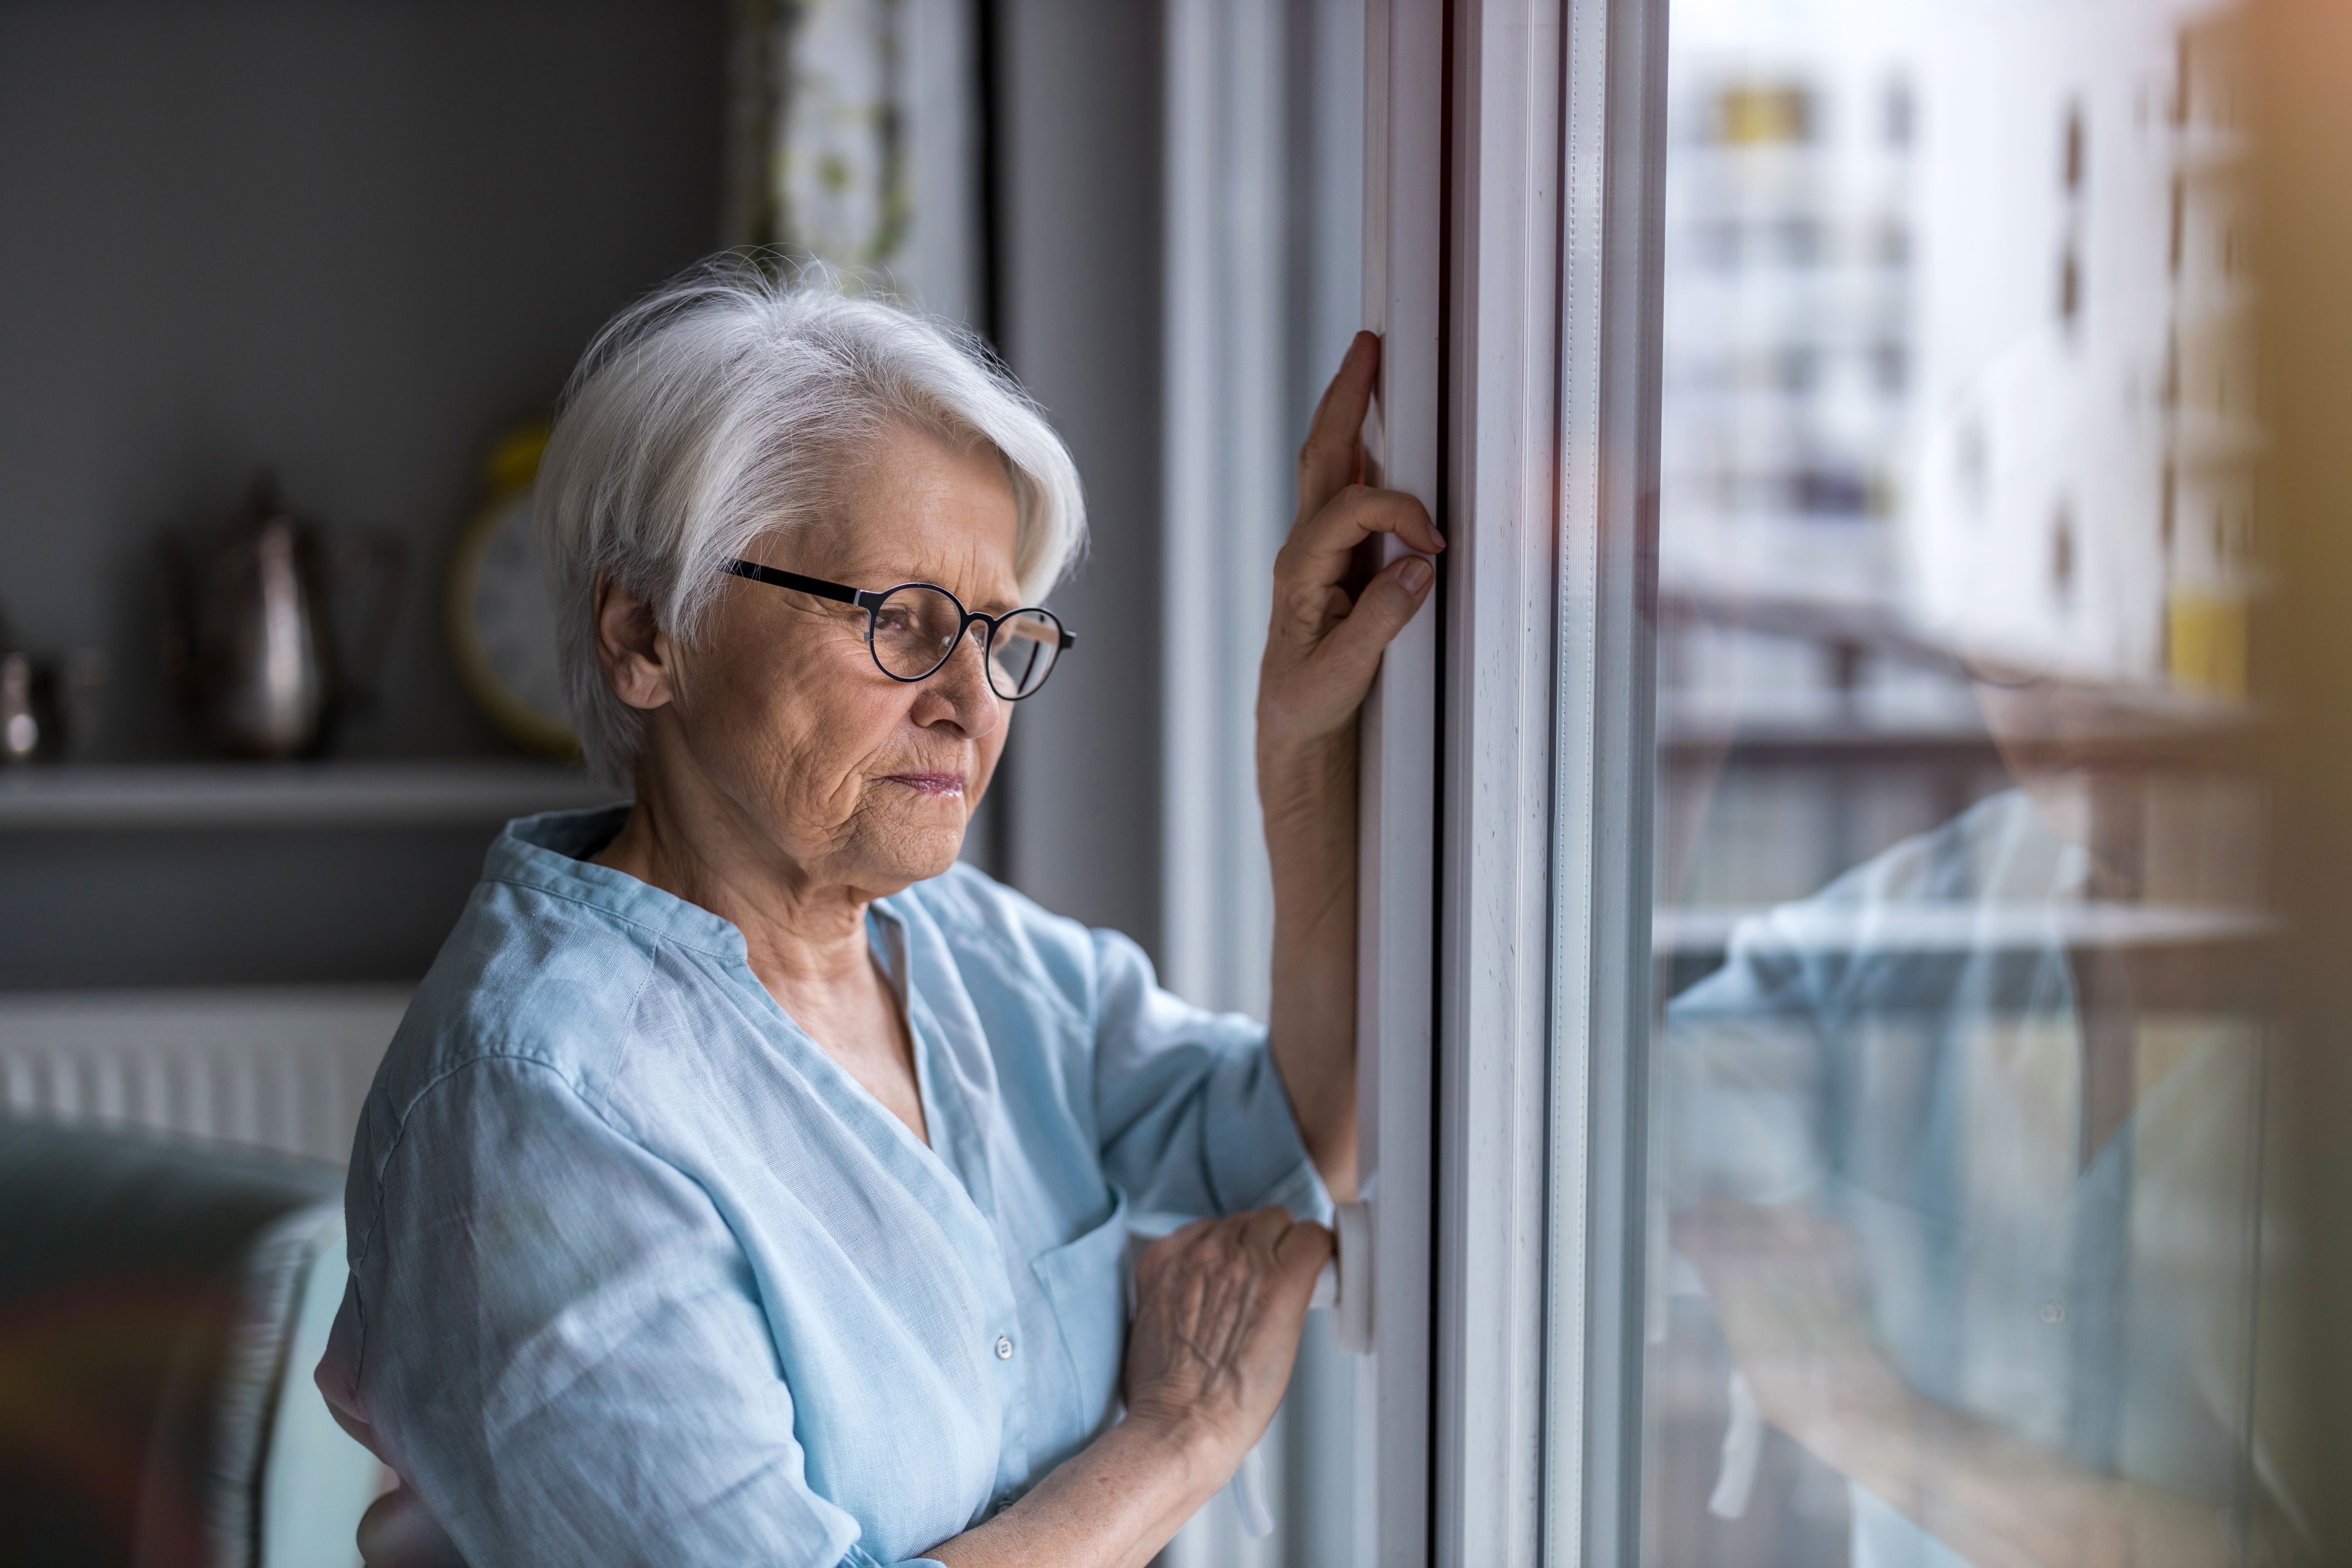 A senior woman looking out a window | Source: Shutterstock